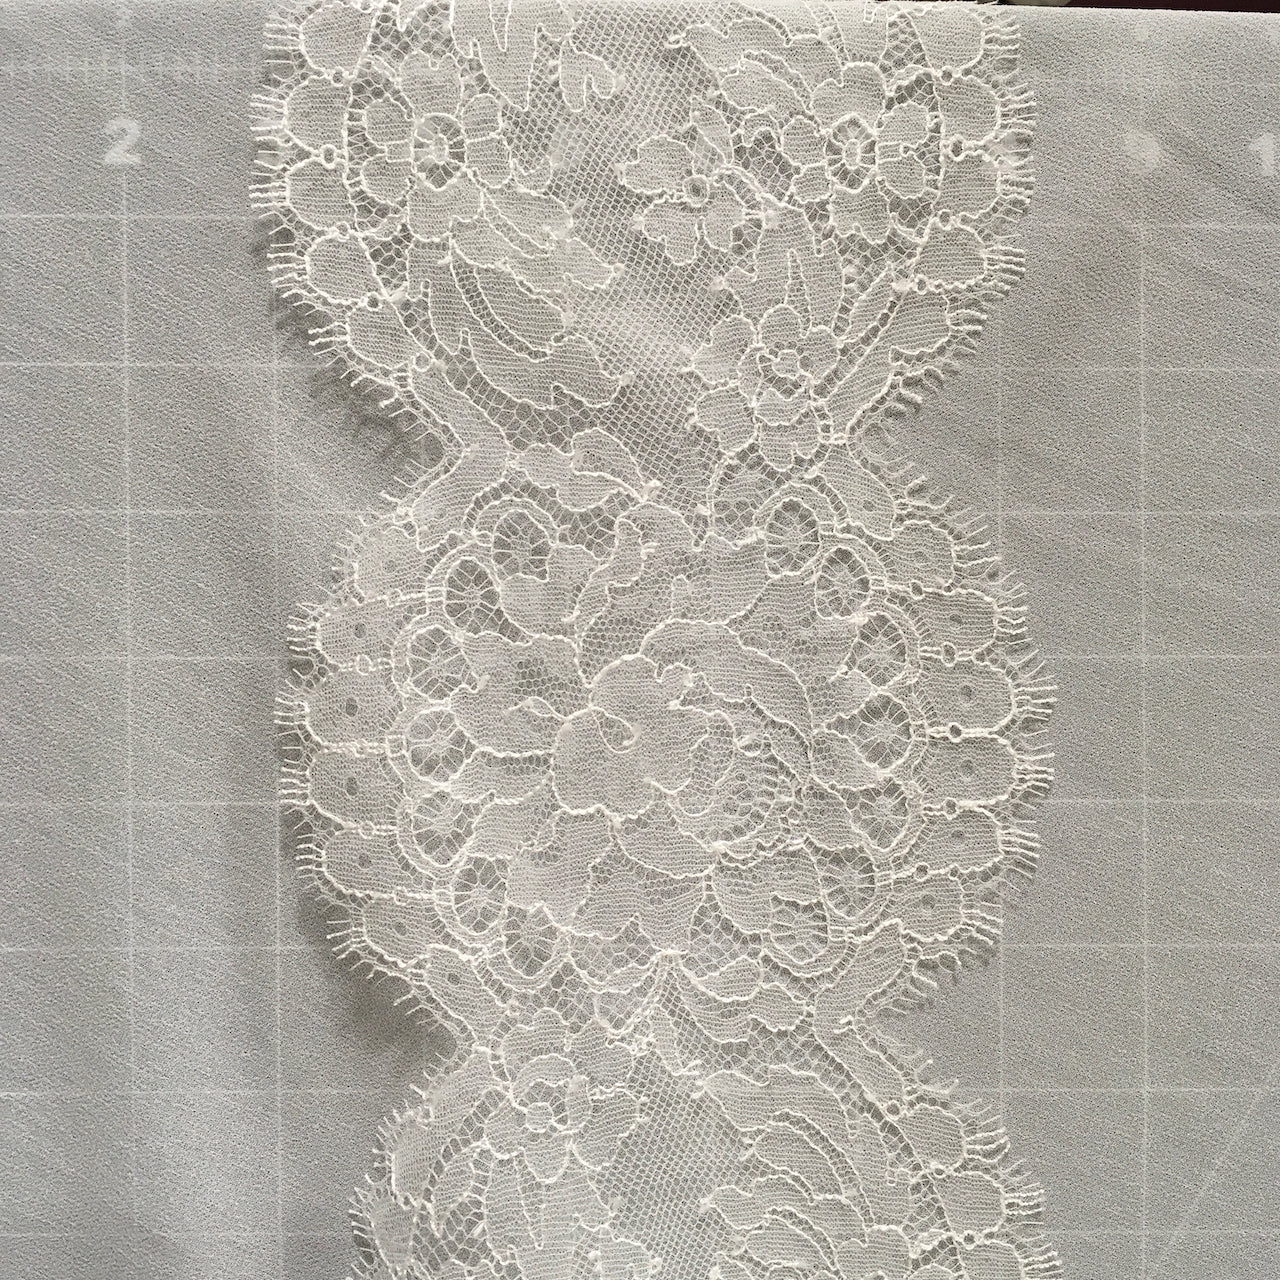 French Trim Lace - Perfect Peoney | Sold by the half yard